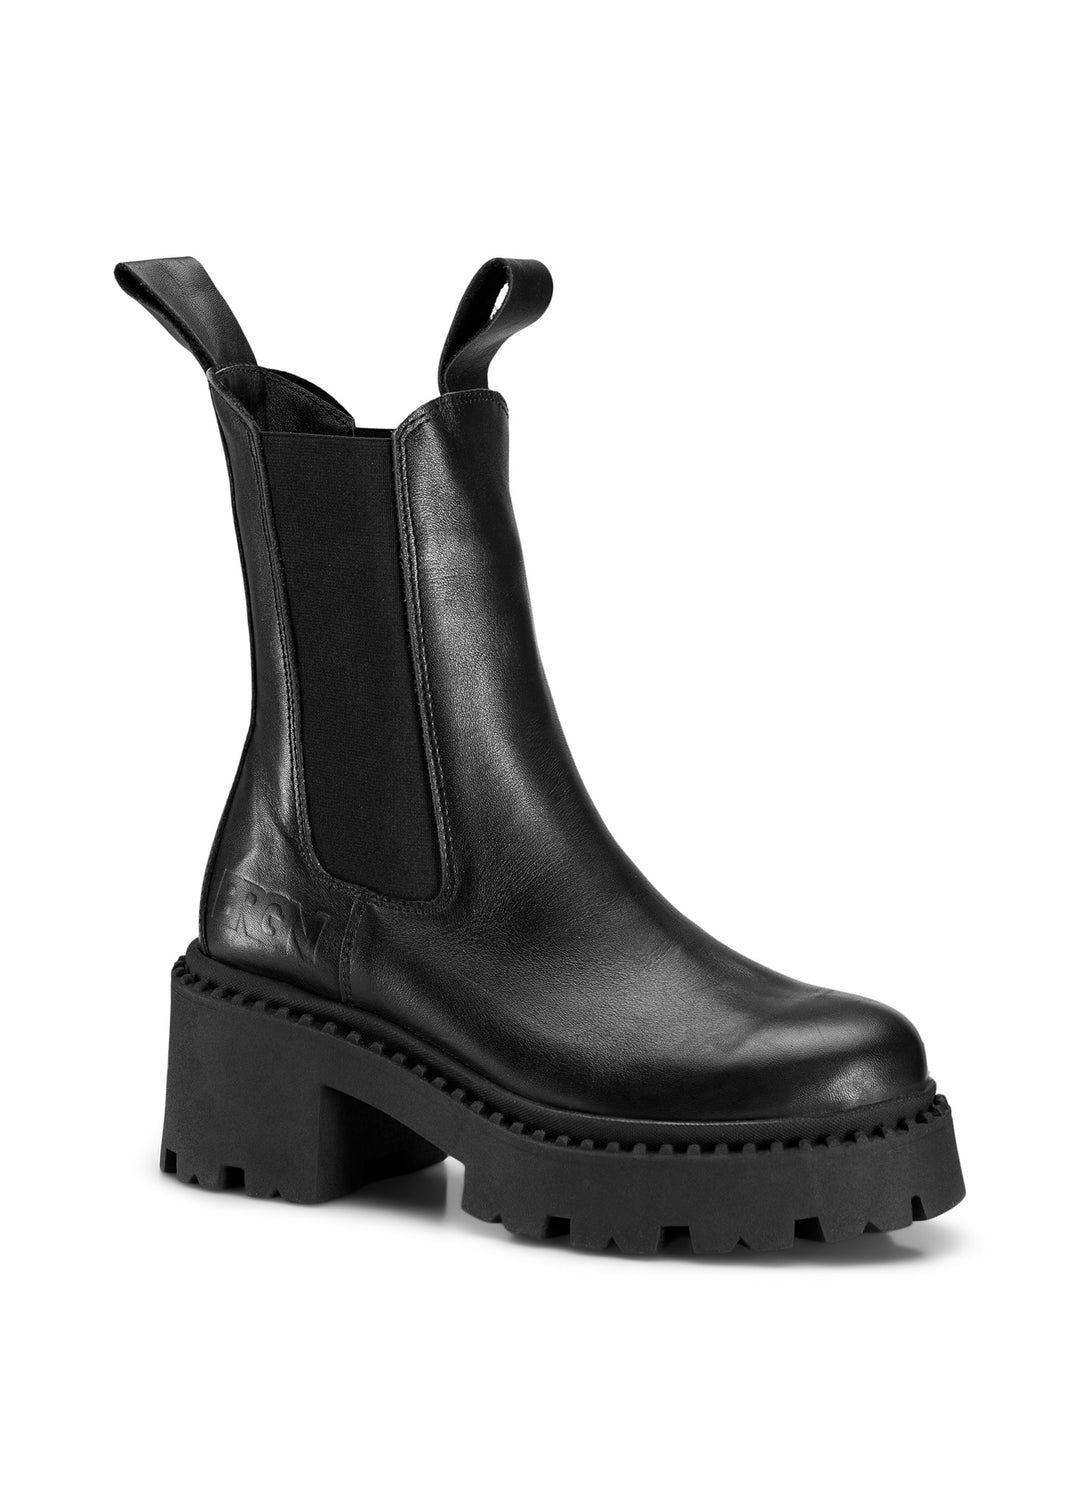 BRGN by Lunde & Gaundal Heel Chelsea Boot Shoes 095 New Black